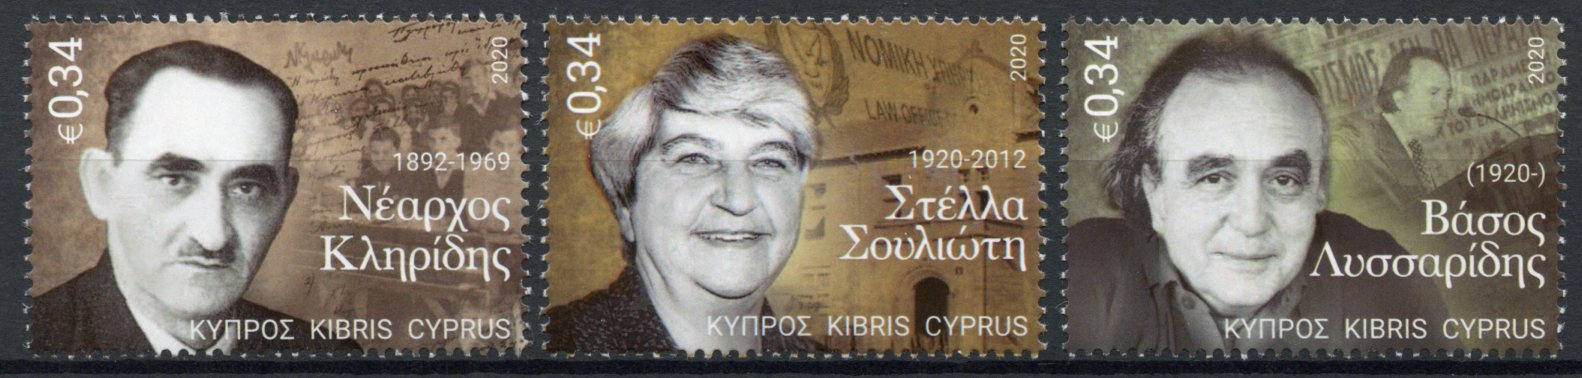 Cyprus 2020 MNH People Stamps Famous Persons Personalities 3v Set